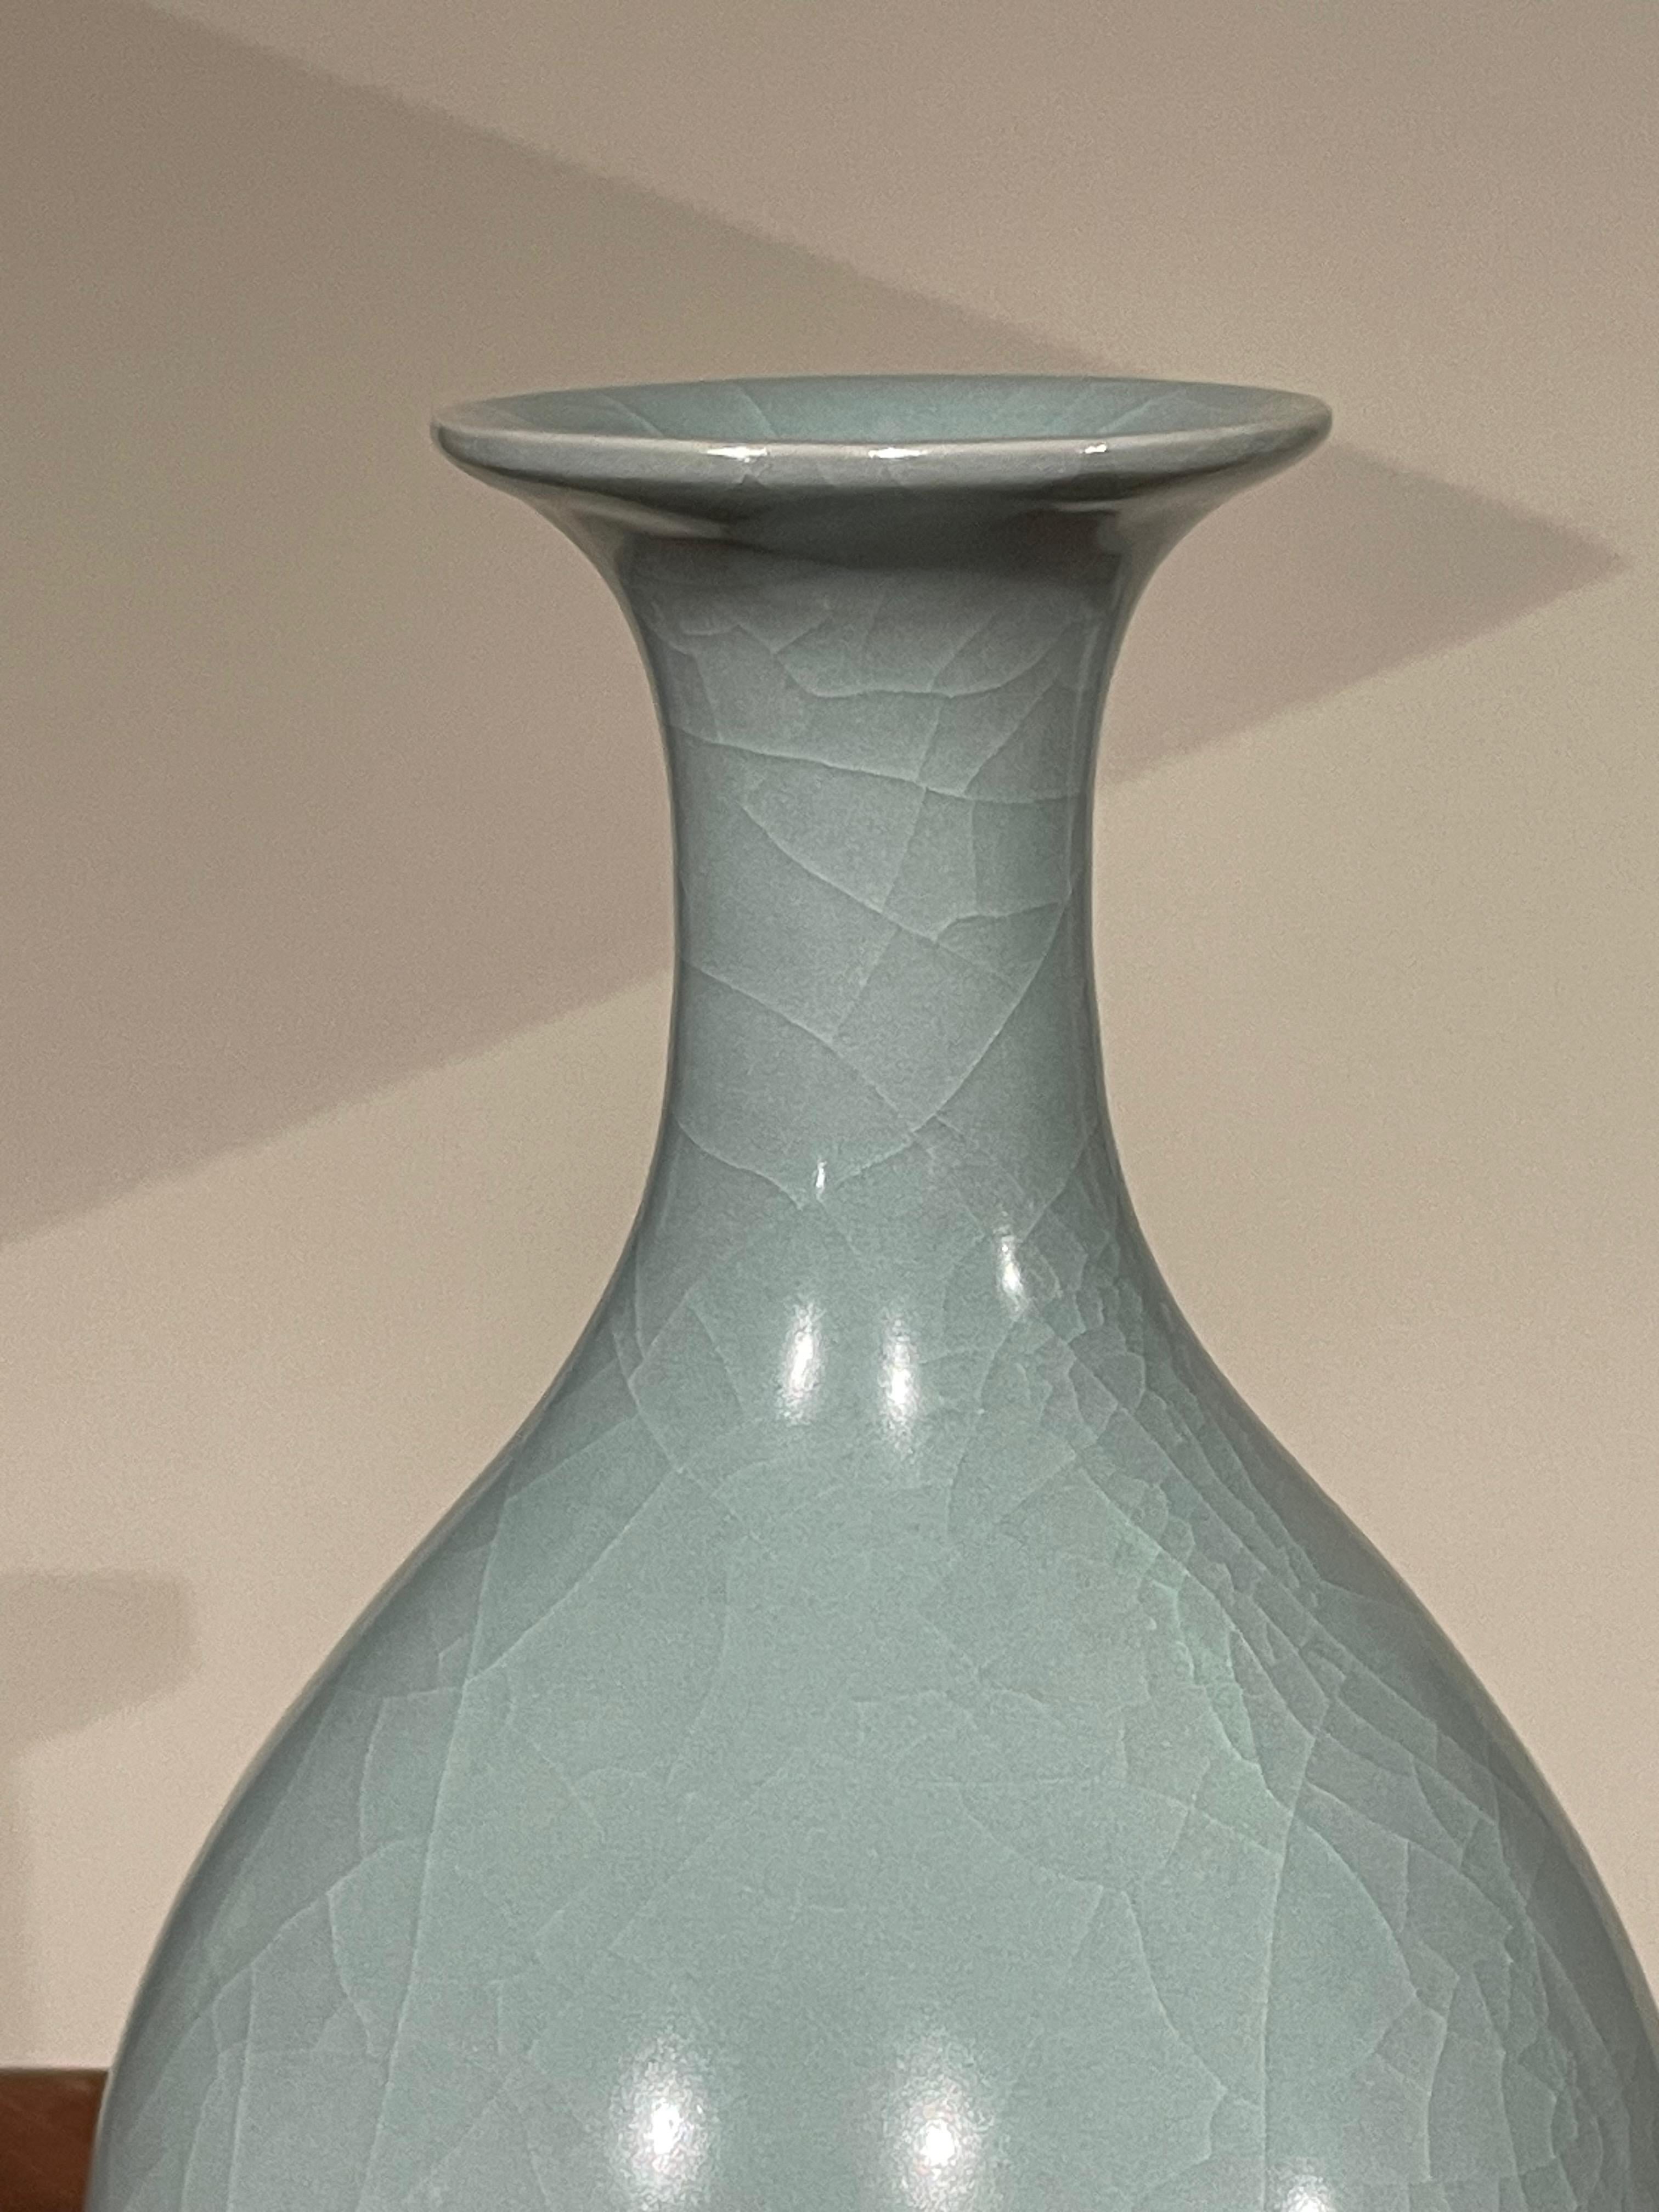 Contemporary Chinese pale turquoise vase.
Classic shape with rounded bottom.
Large collection available with varying sizes and shapes.
Sold individually.
